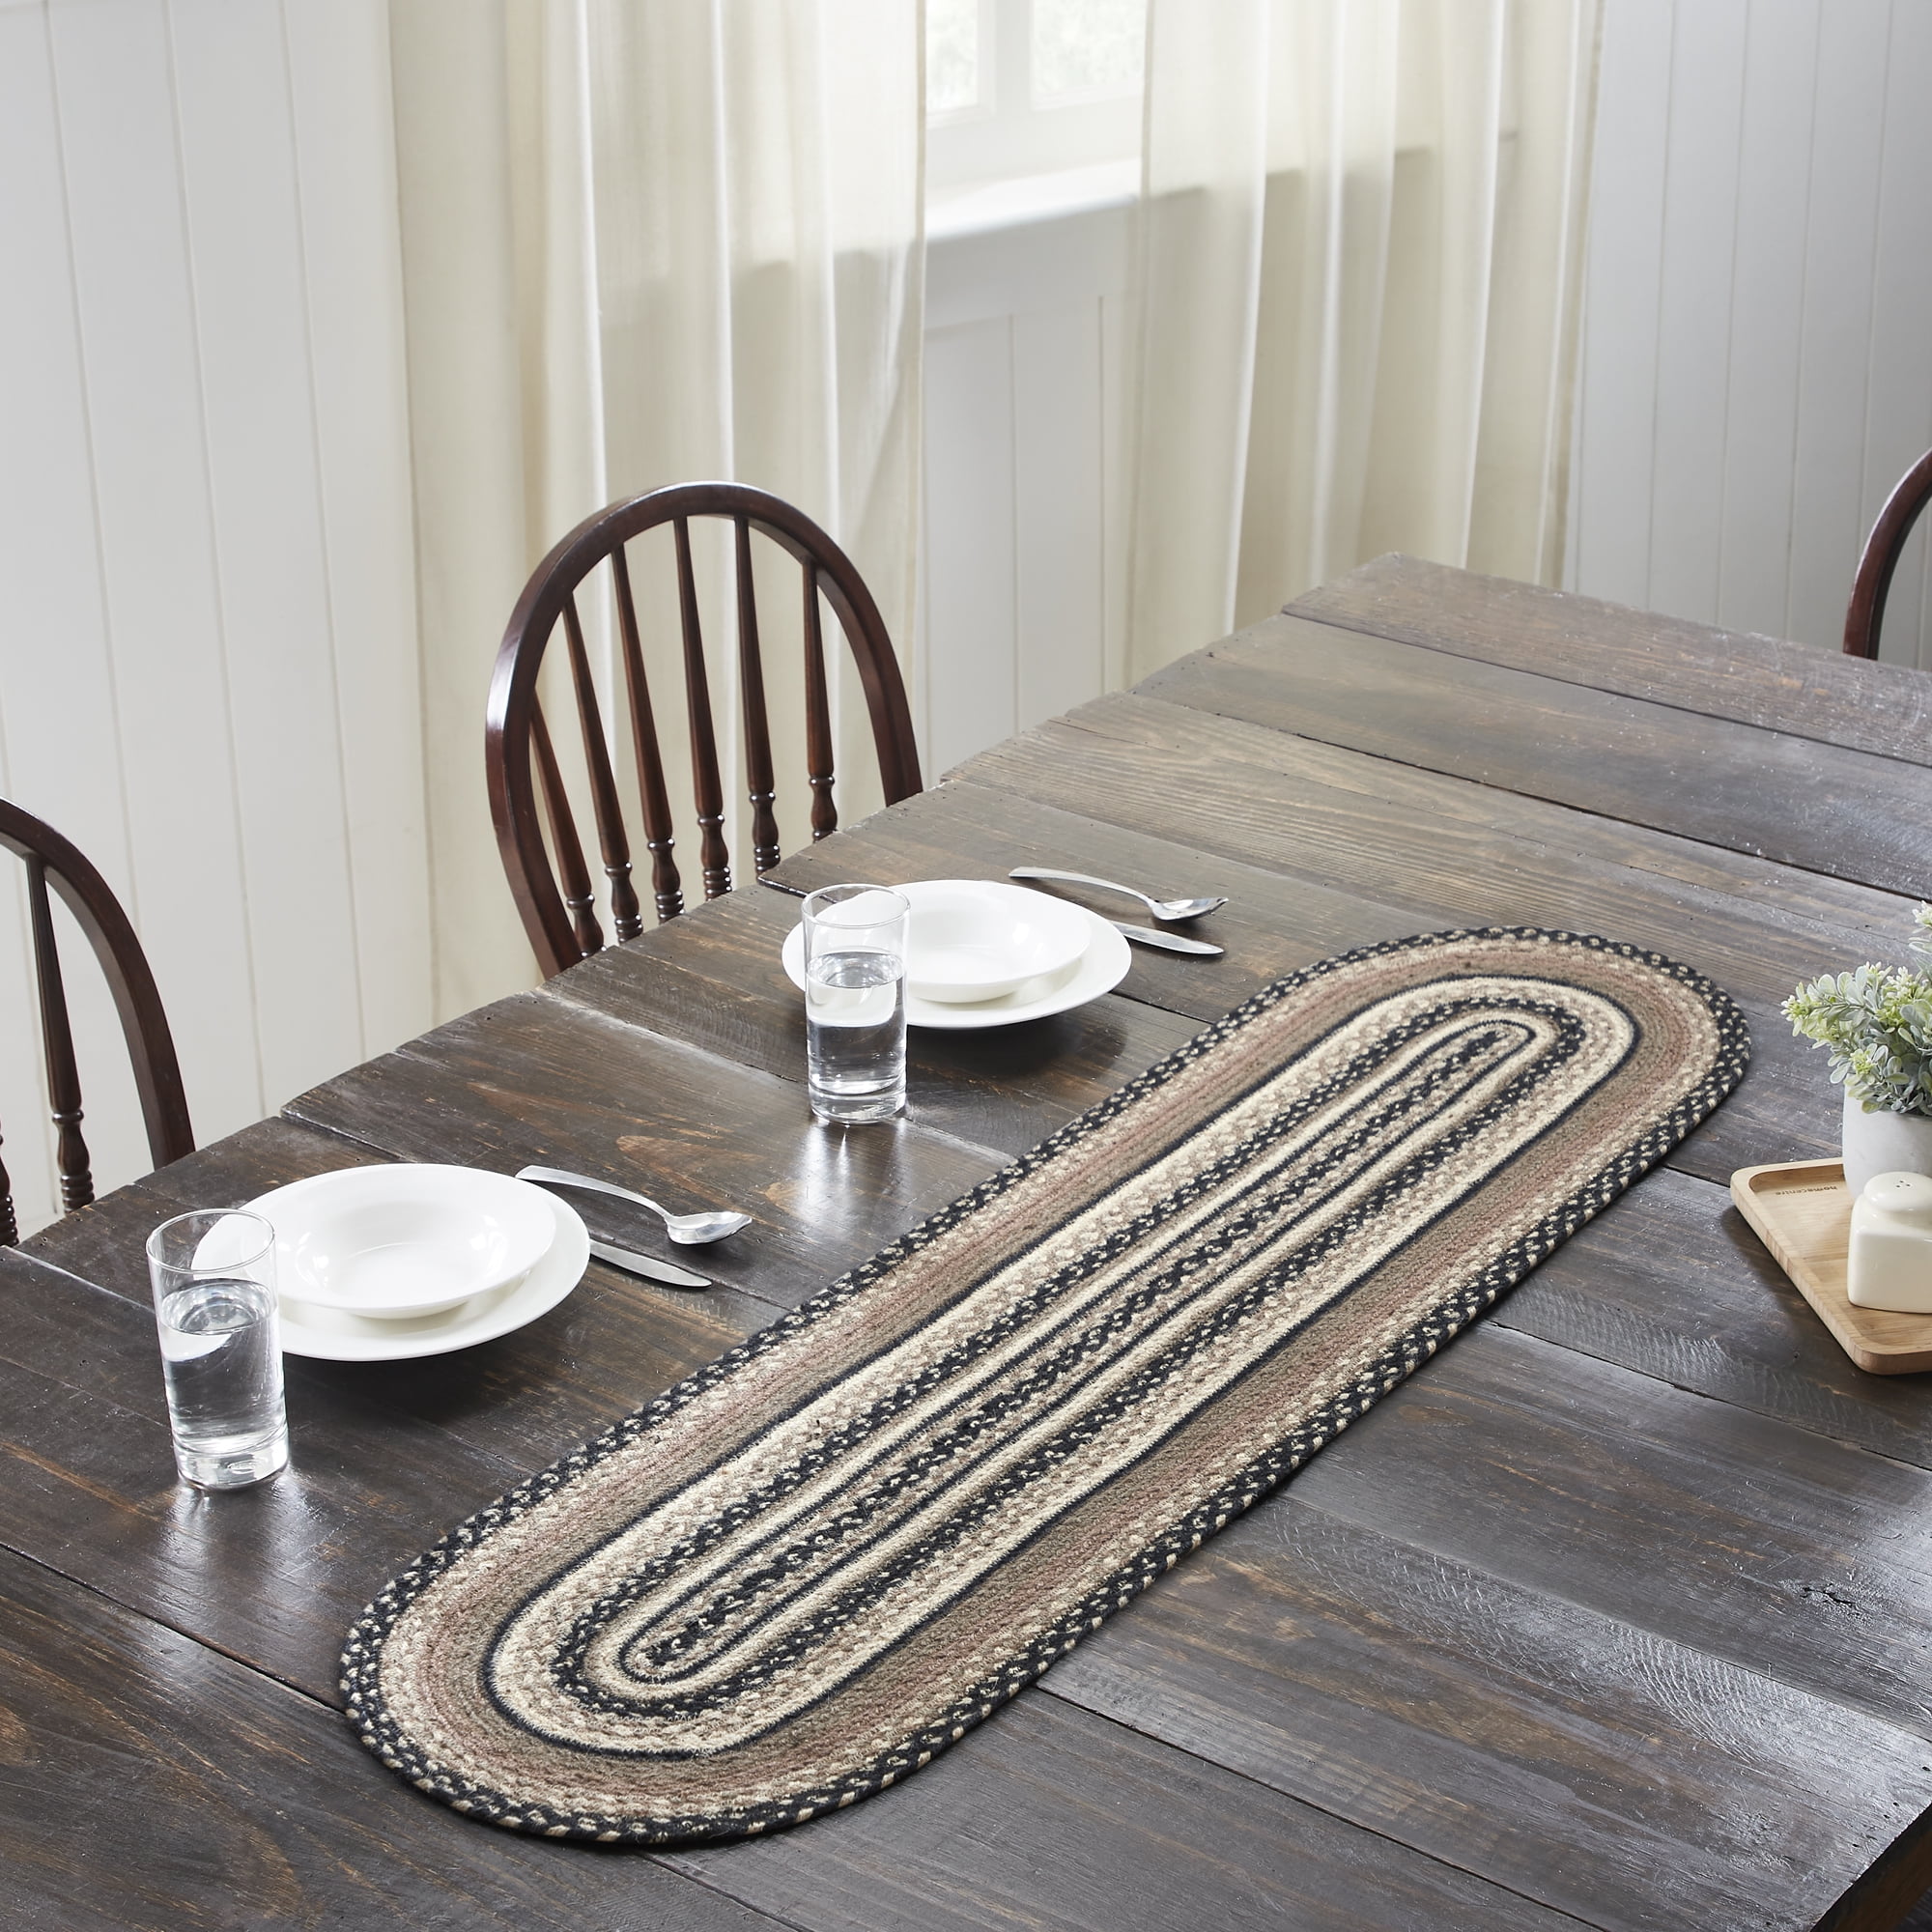 Placemat Heritage Farms Jute Primitive Braided Table Decor VHC Brands – VHC  Brands Home Decor